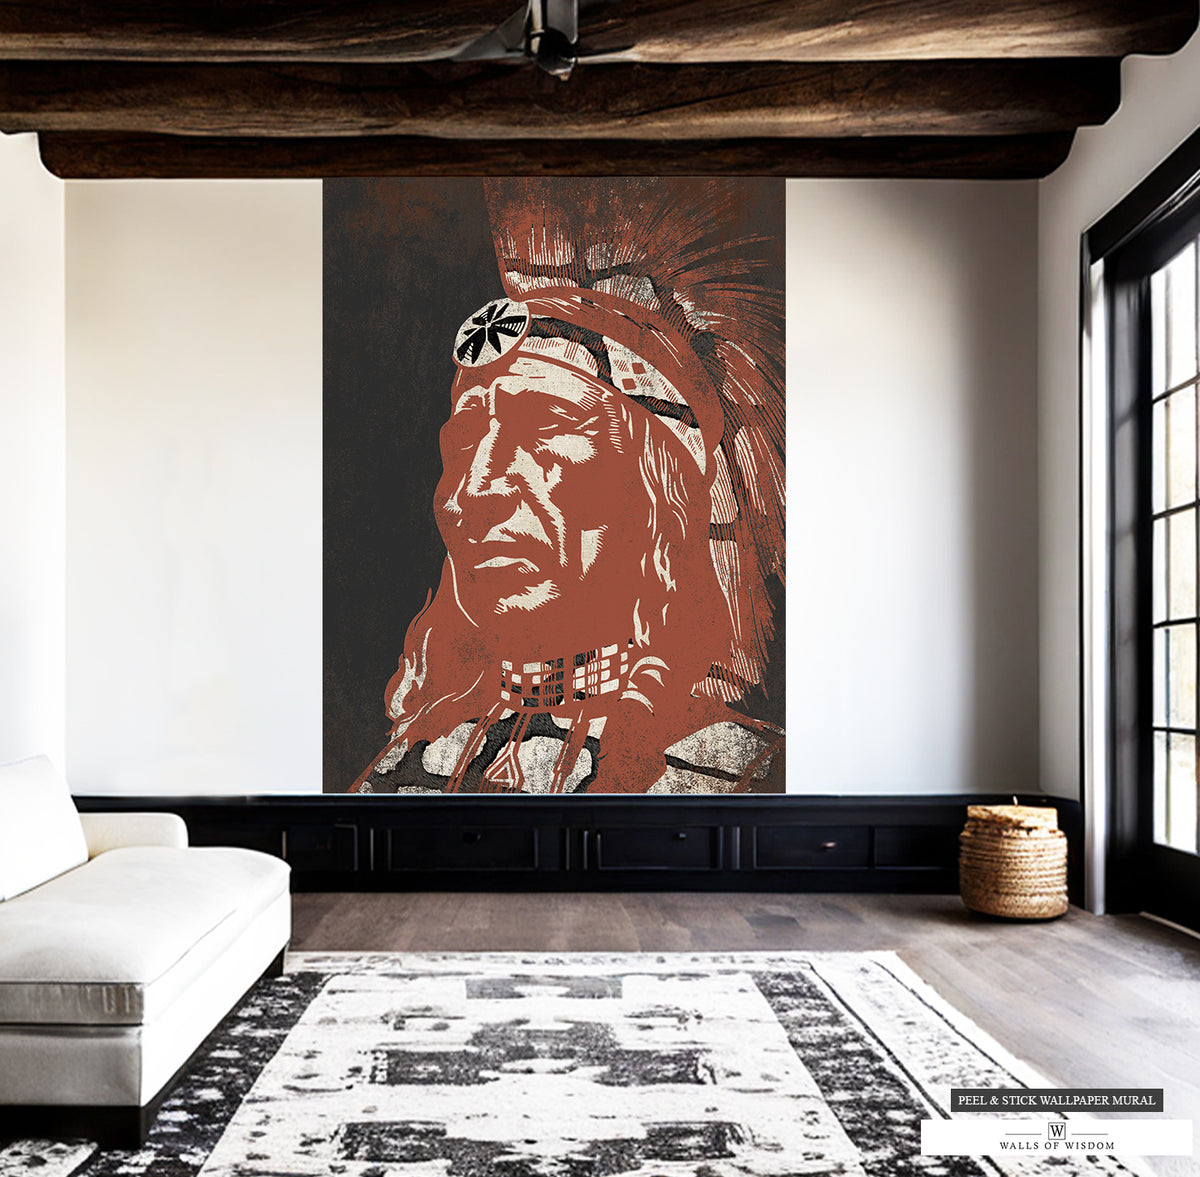 Dynamic Native American Chief mural in contemporary earth tones for statement walls.